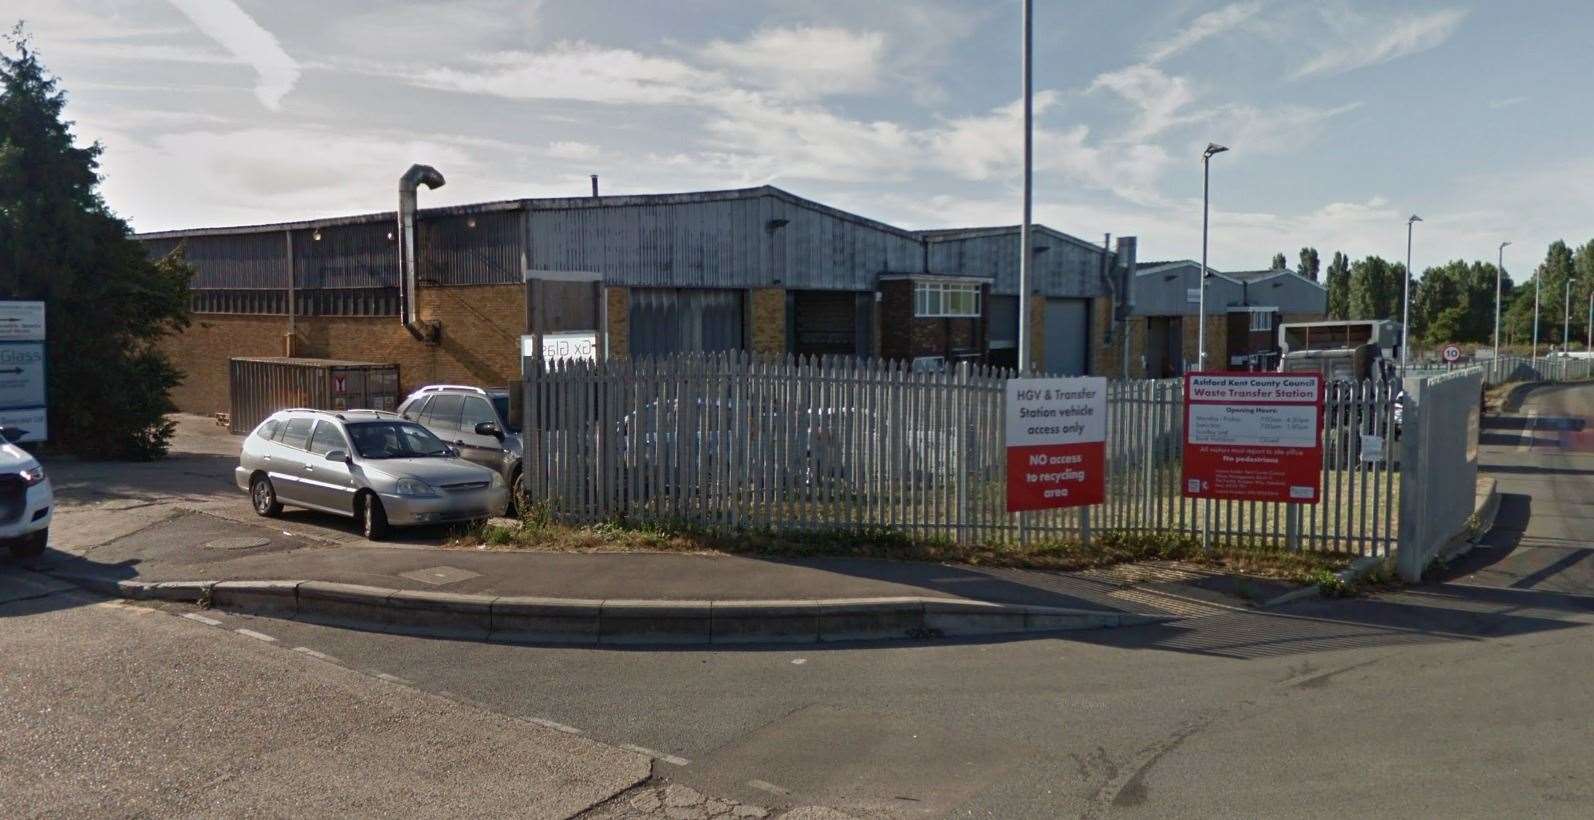 The Household Waste Recycling Centre on Brunswick Road, Ashford caught fire this afternoon. Picture: Google (13158577)